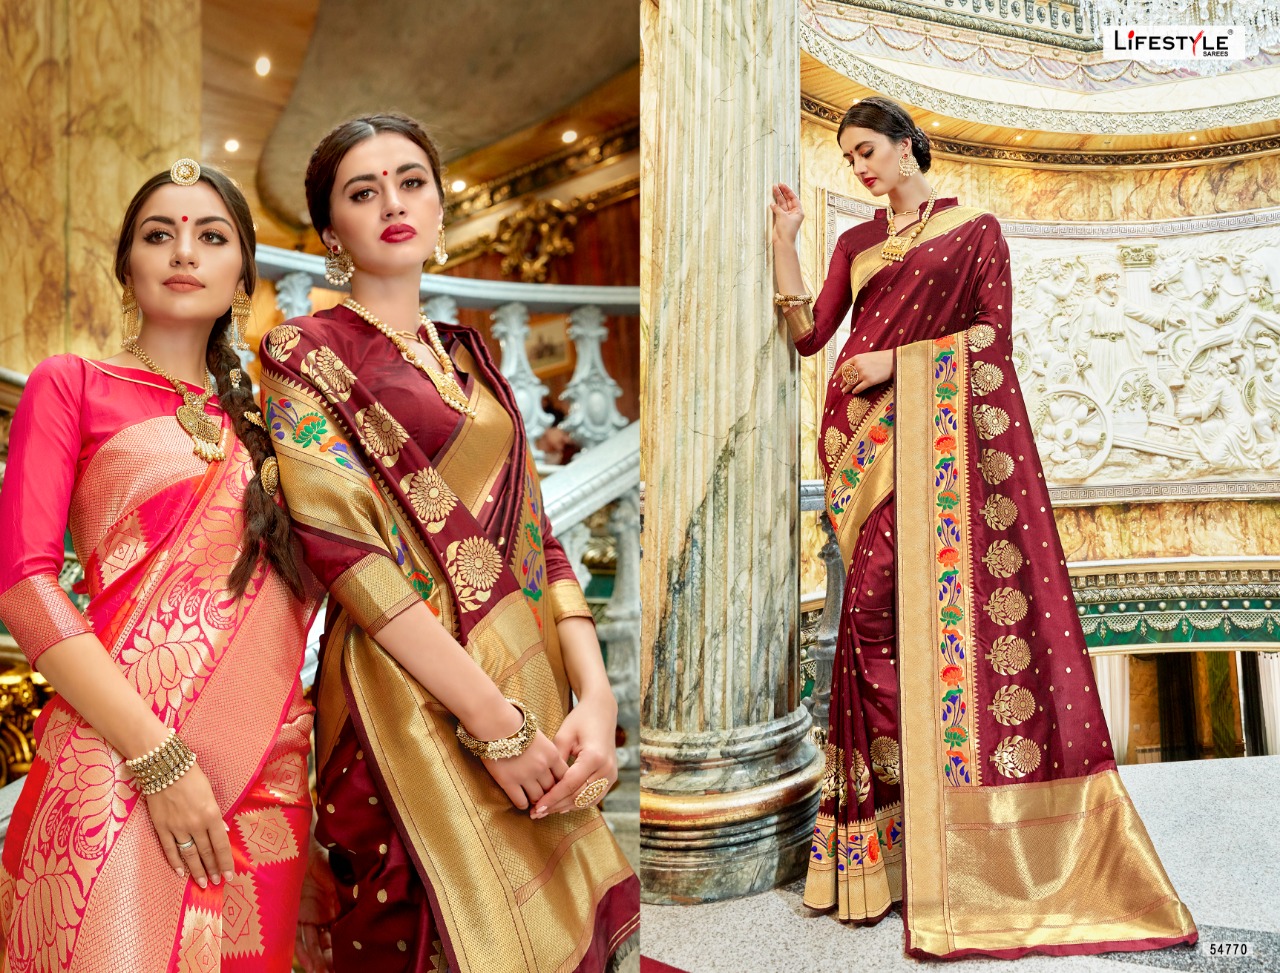 Soundarya Saree By LIFESTYLE 54761 TO 54772 New Designs - ashdesigners.in